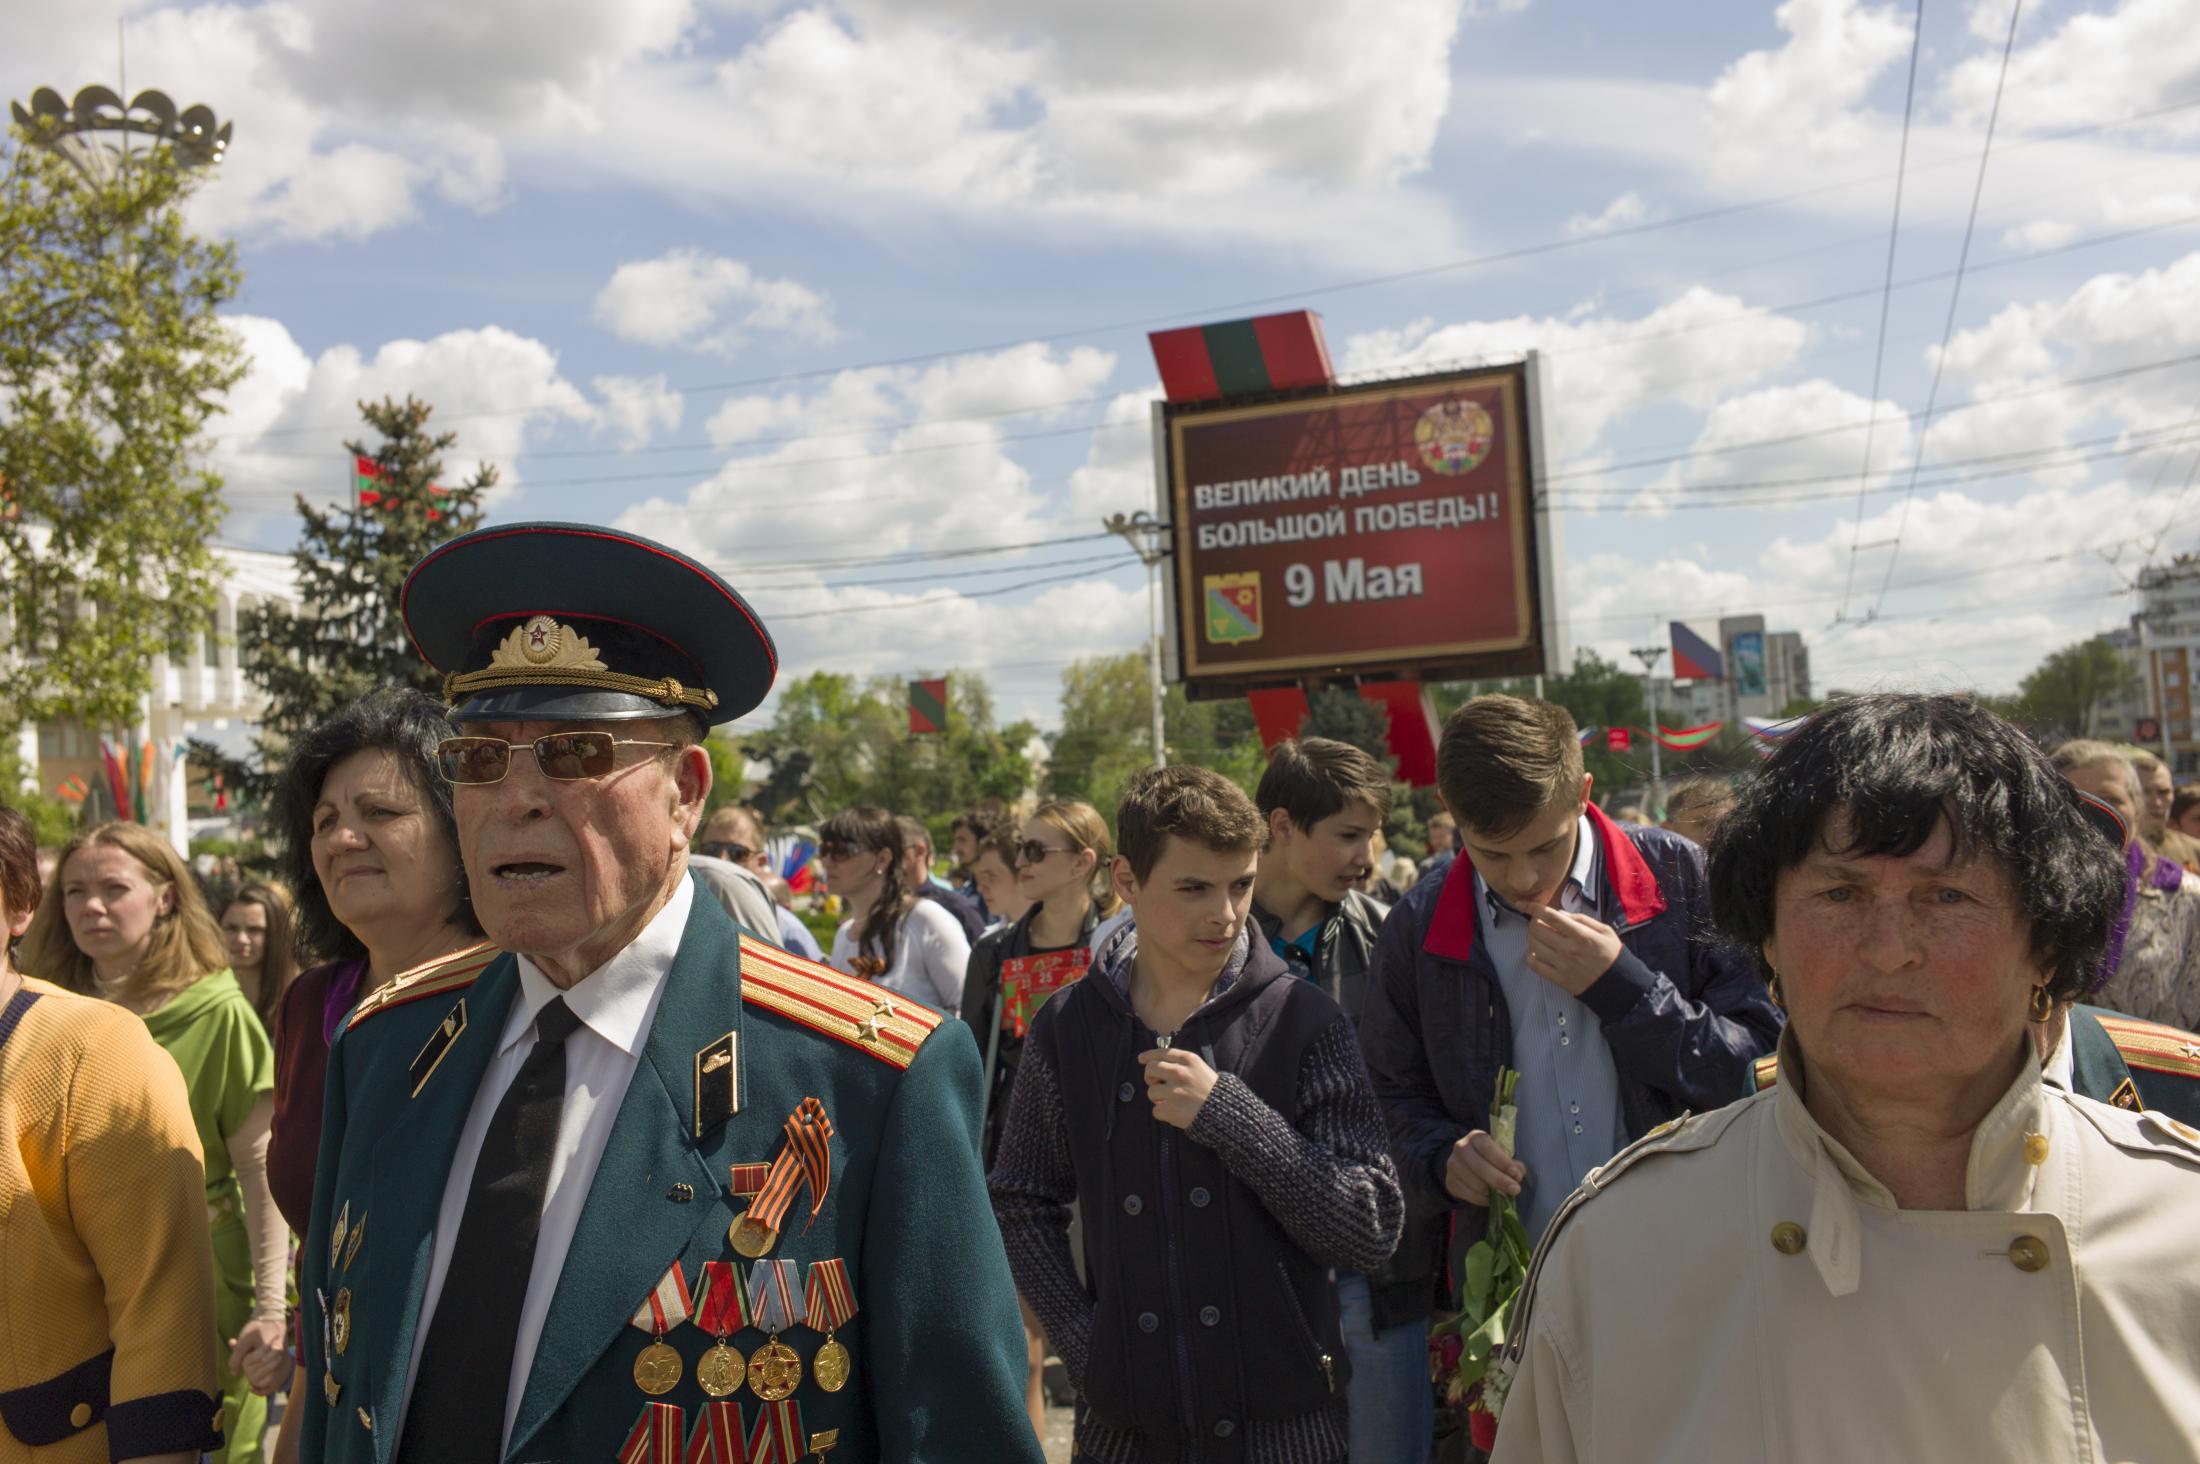 Victory Day in Transnistria